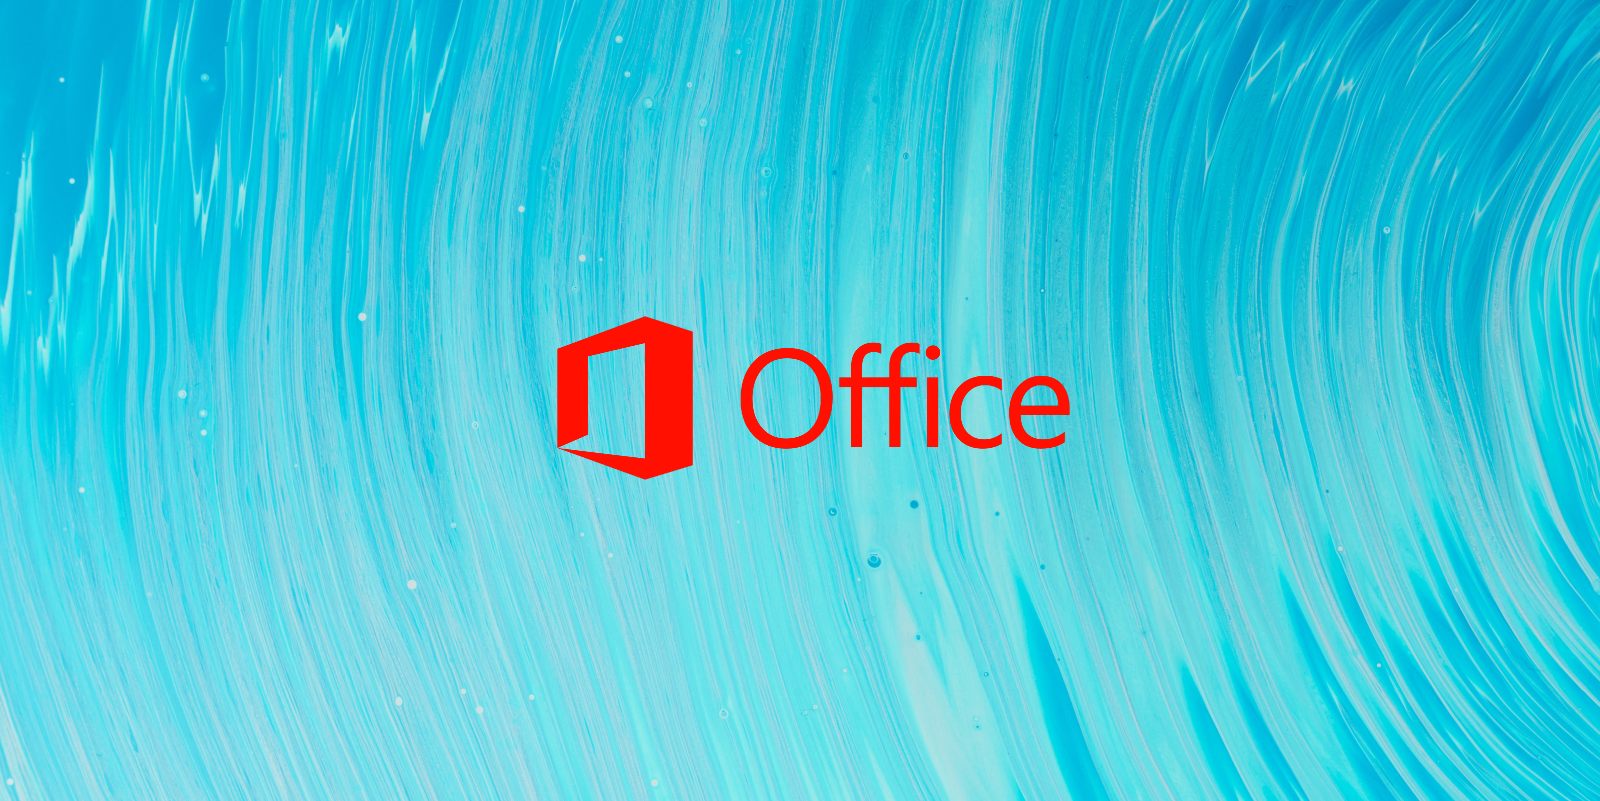 Bring Home Microsoft Office for $34.97 With Limited Time Deals